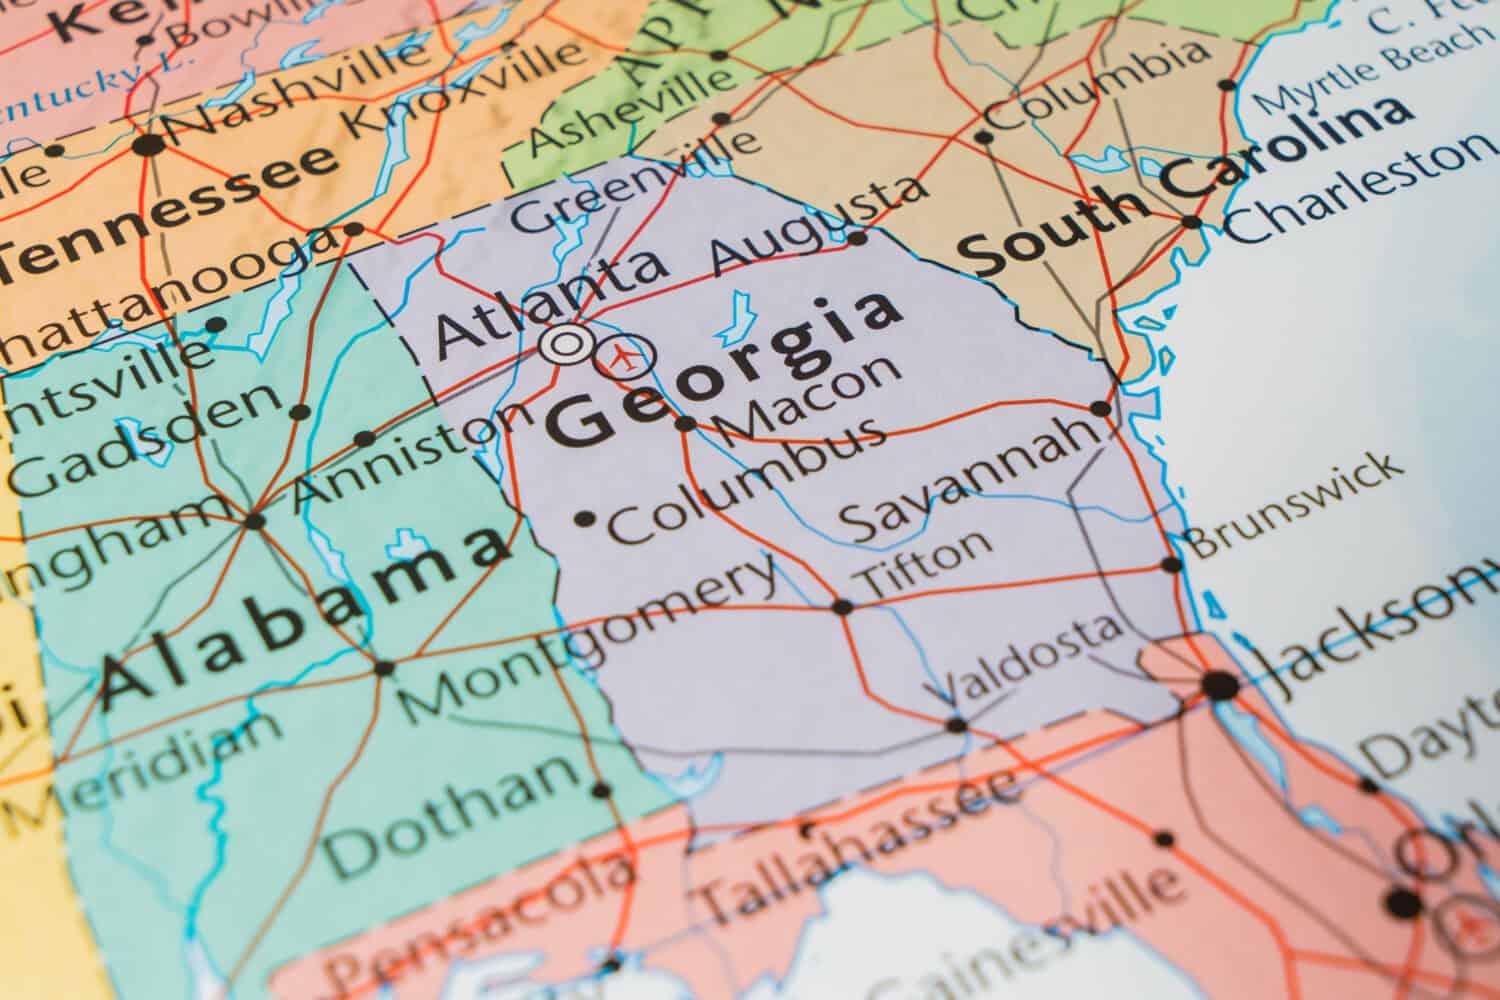 State of Georgia on the map of the USA